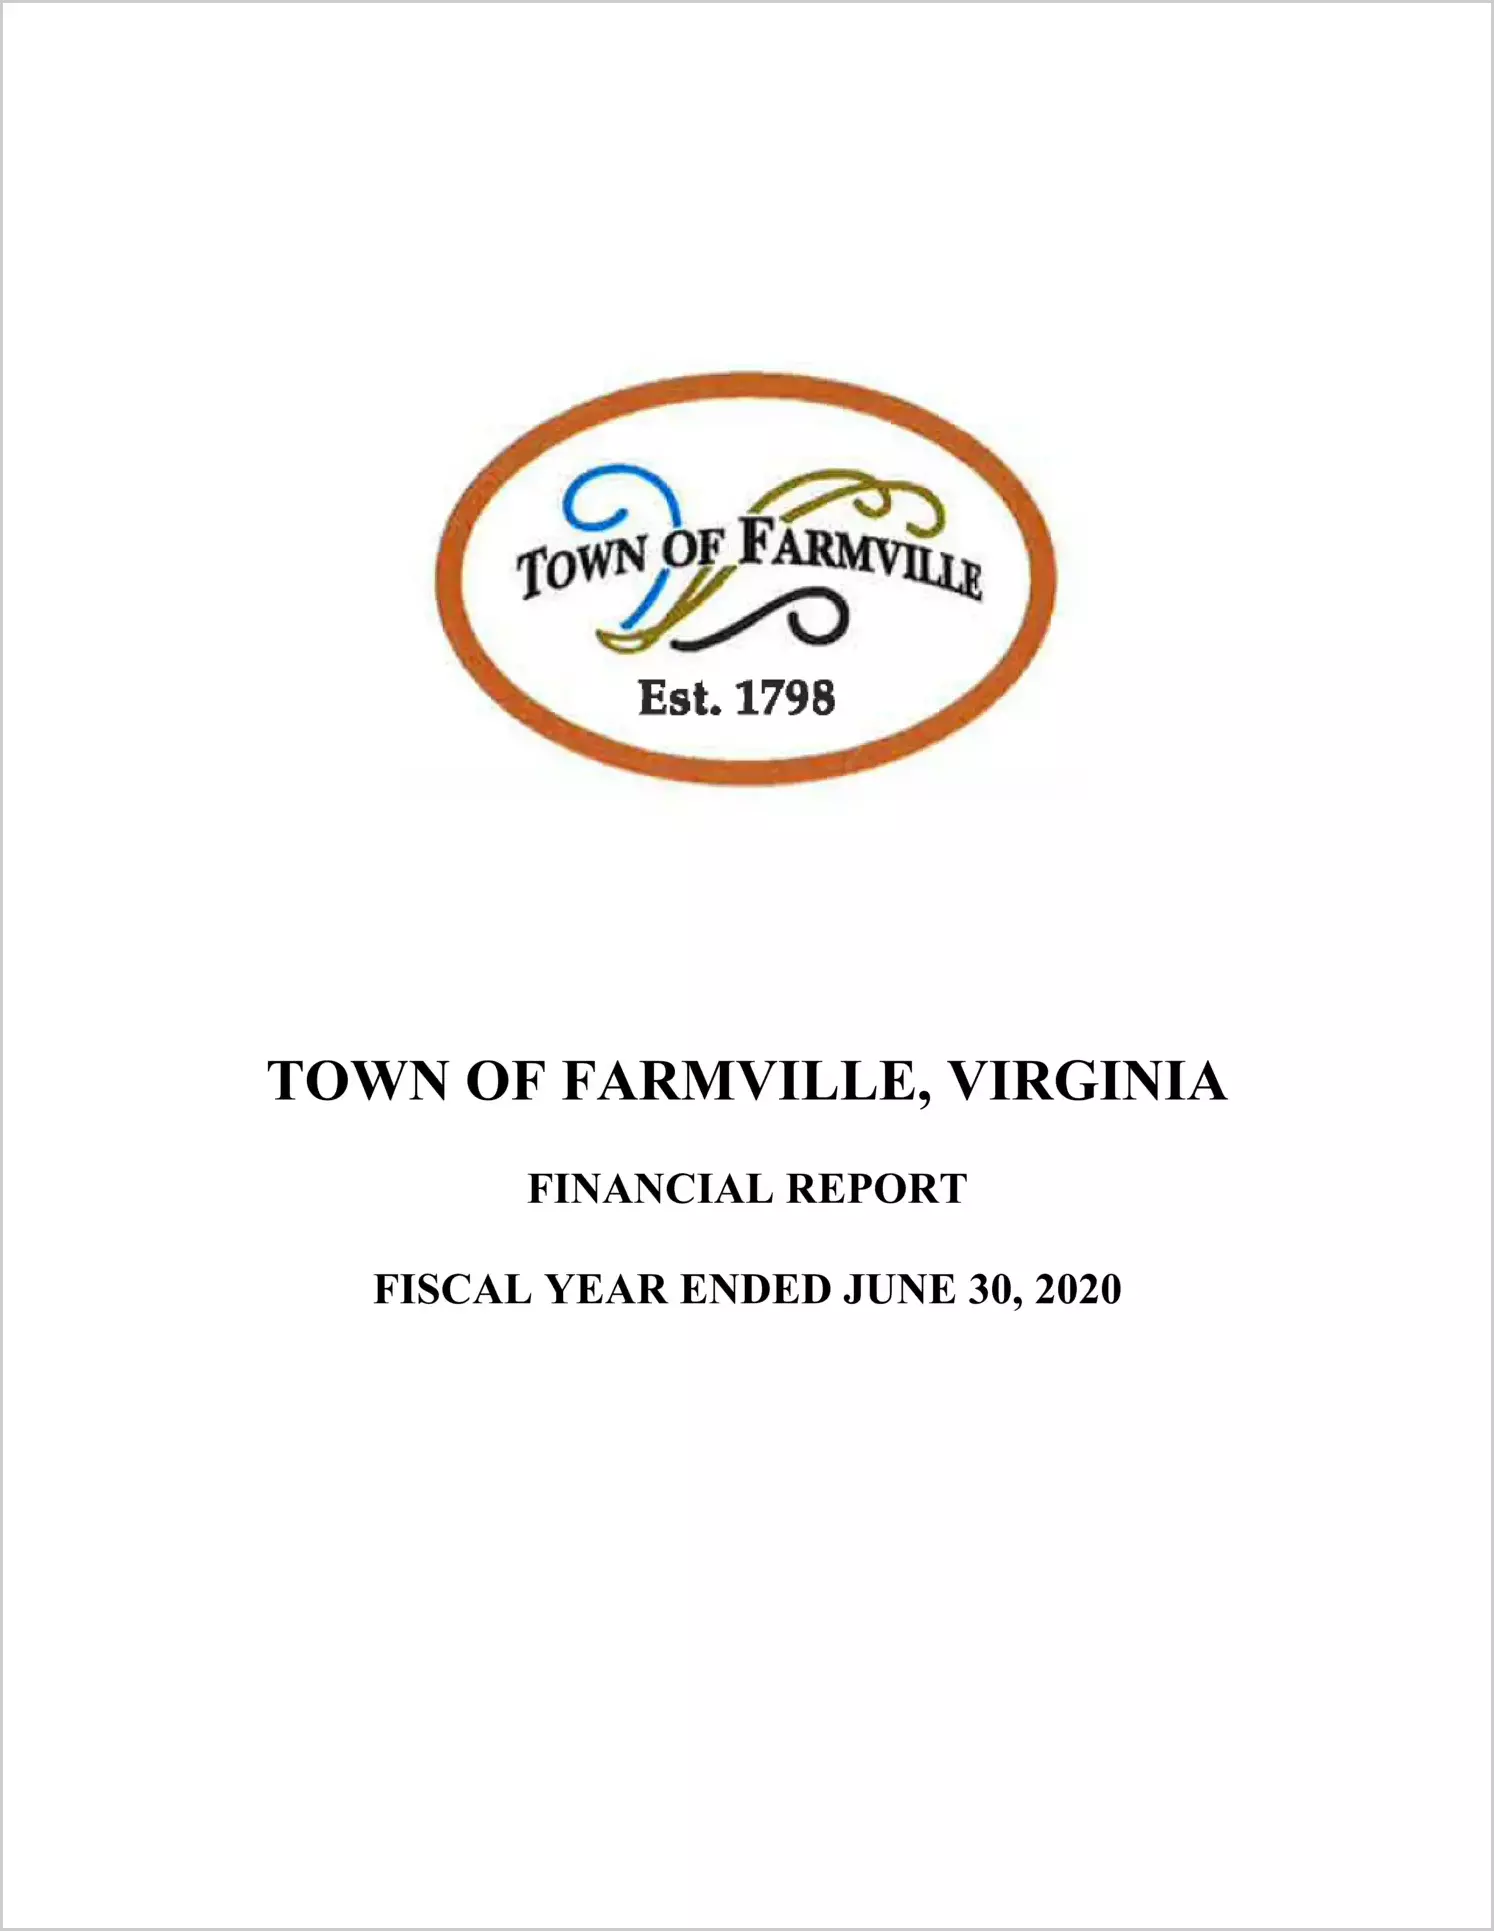 2020 Annual Financial Report for Town of Farmville